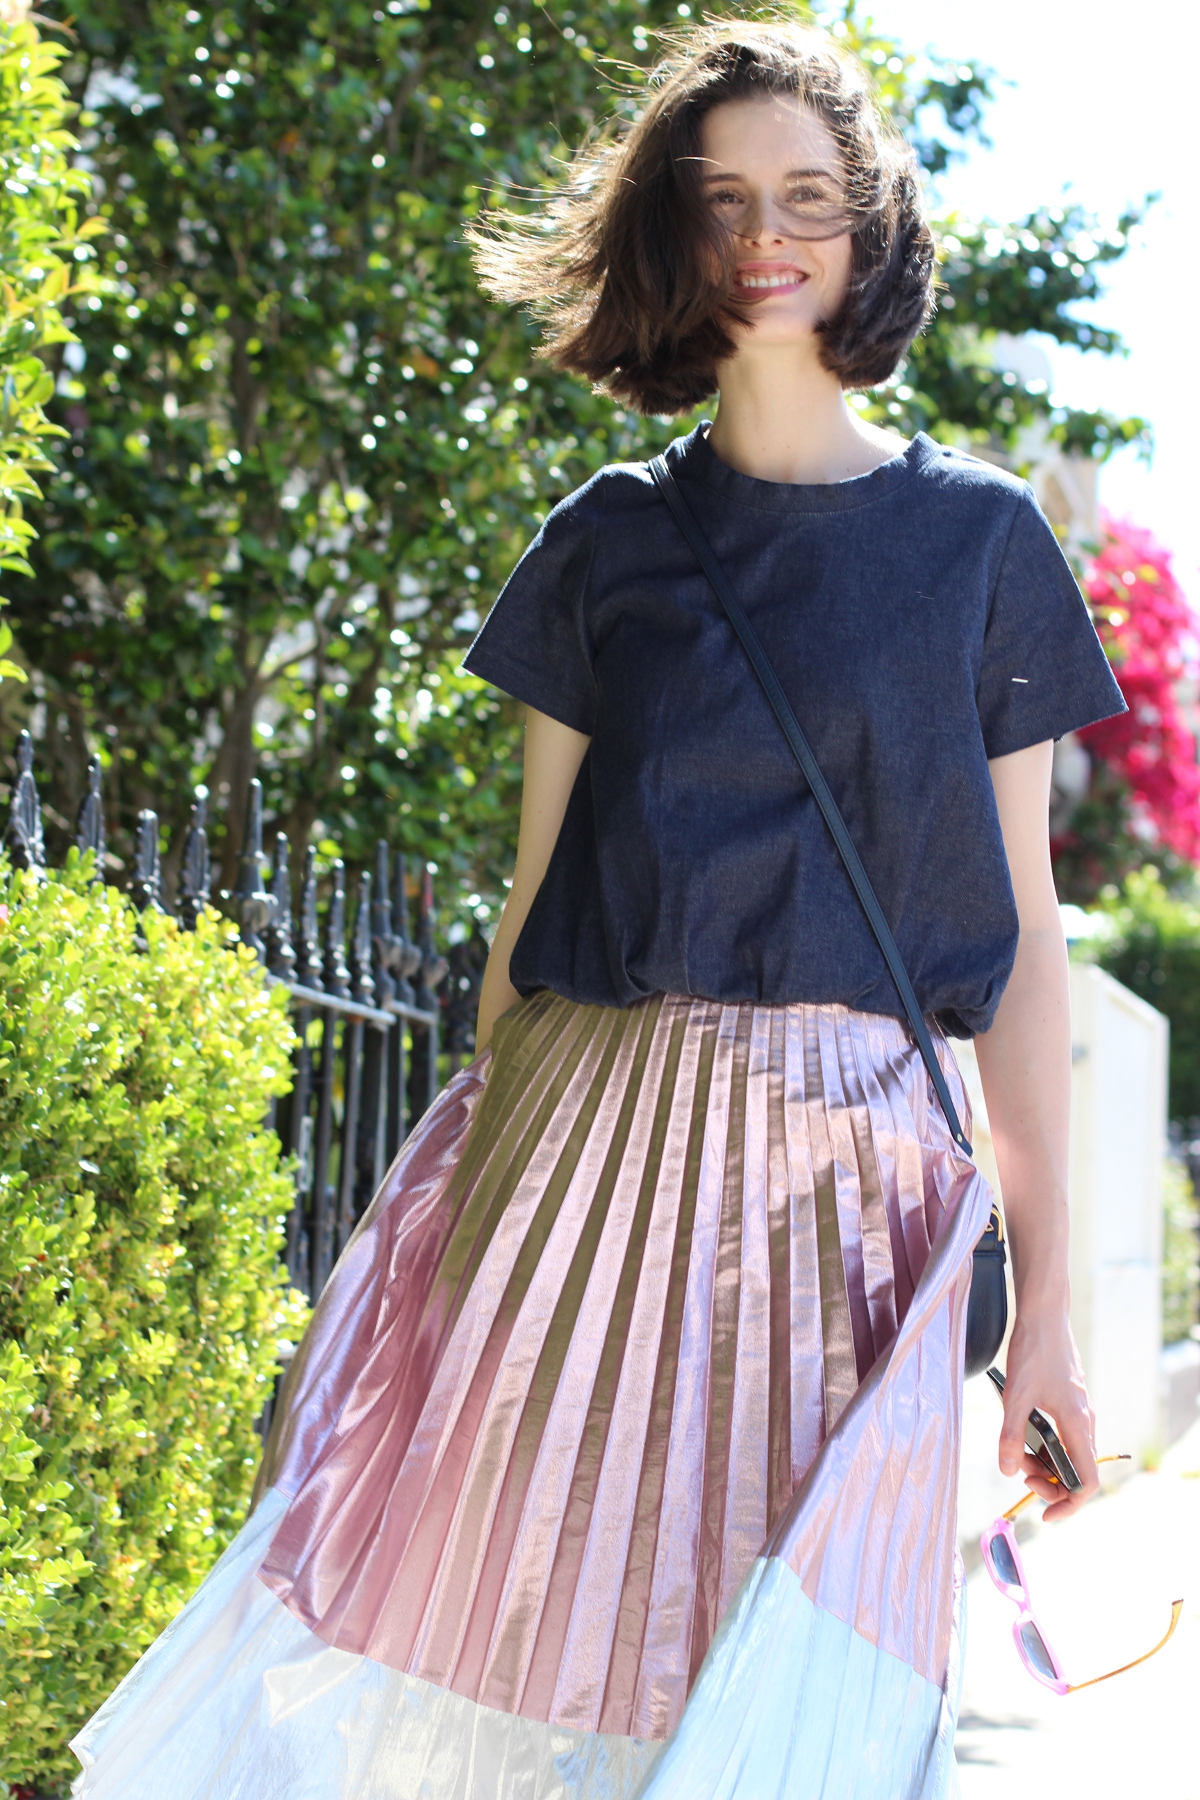 BY CHILL AUSTRALIAN STYLE BLOGGER Chloe Hill Wearing Soot the Label Denim poof top, Easton Pearson metallic skirt, Deadly Ponies bag, see by chloe metallic shoes and AM eyewear sunglassesIG